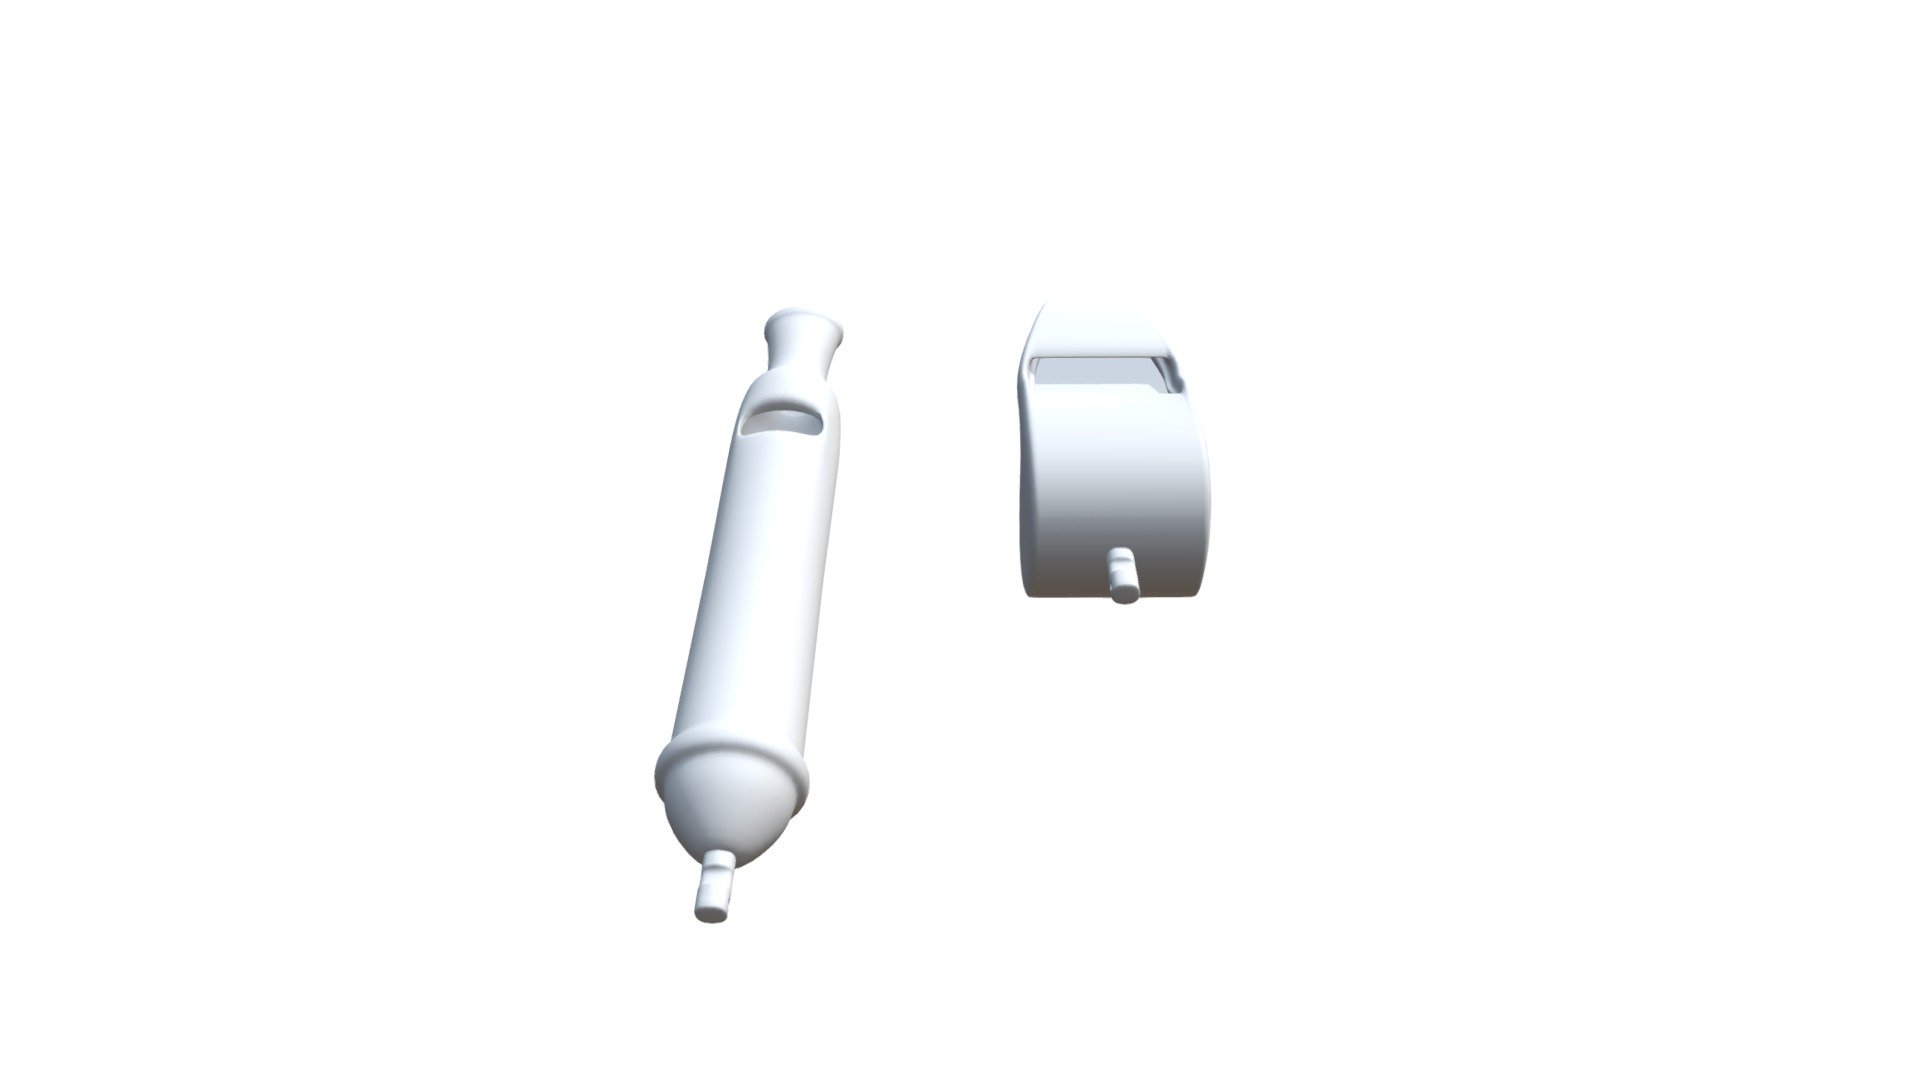 Two whistles British and Amercian for Police soon on Sale.http://uncle808s.blogspot.com - Whistles - Buy Royalty Free 3D model by uncle808us 3d model